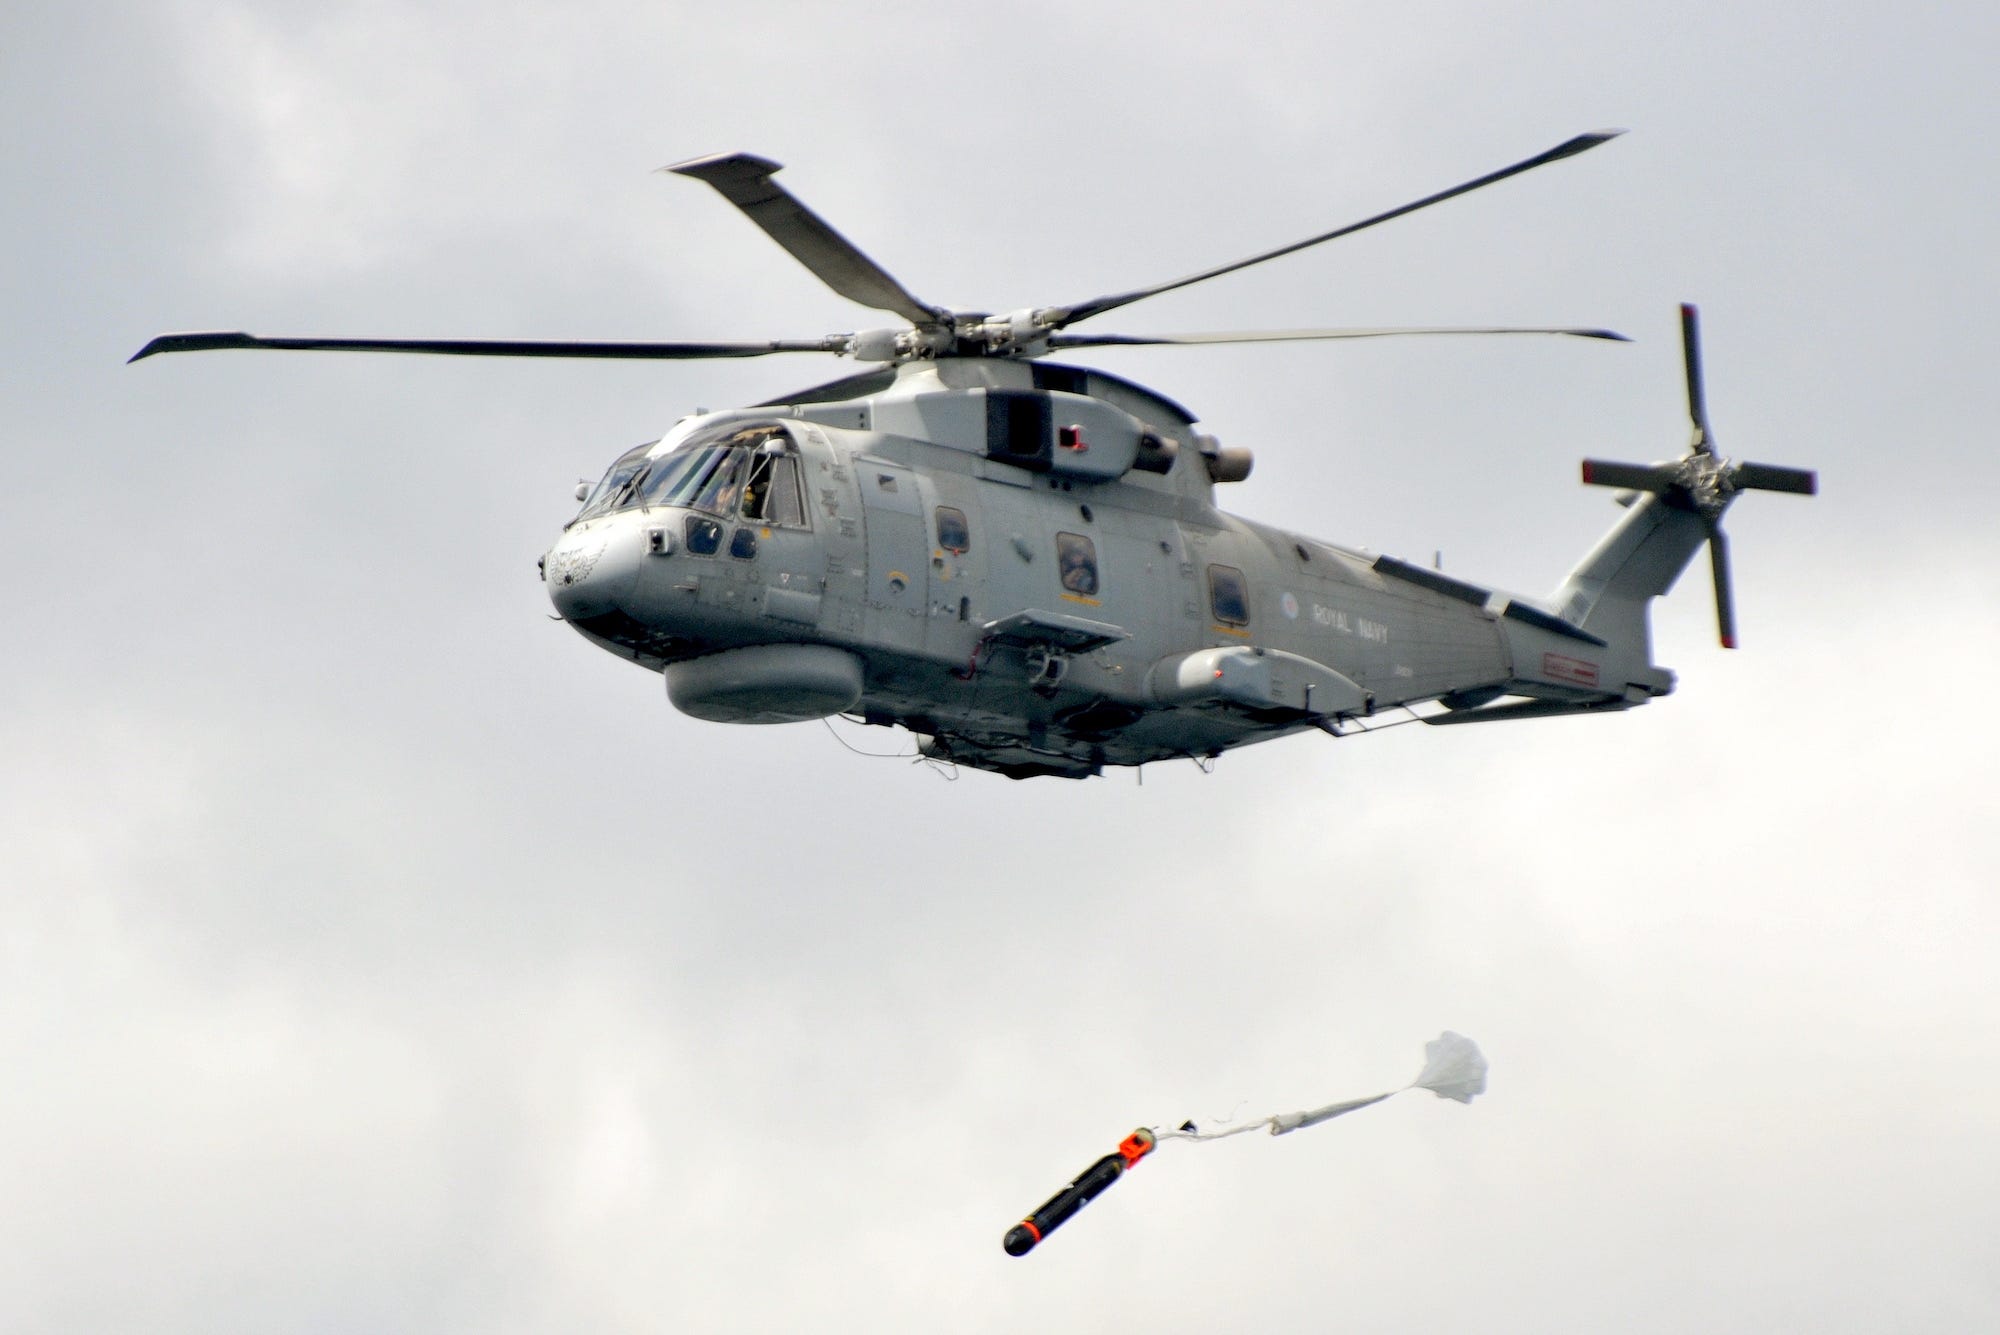 Royal Navy Merlin helicopter launches torpedo